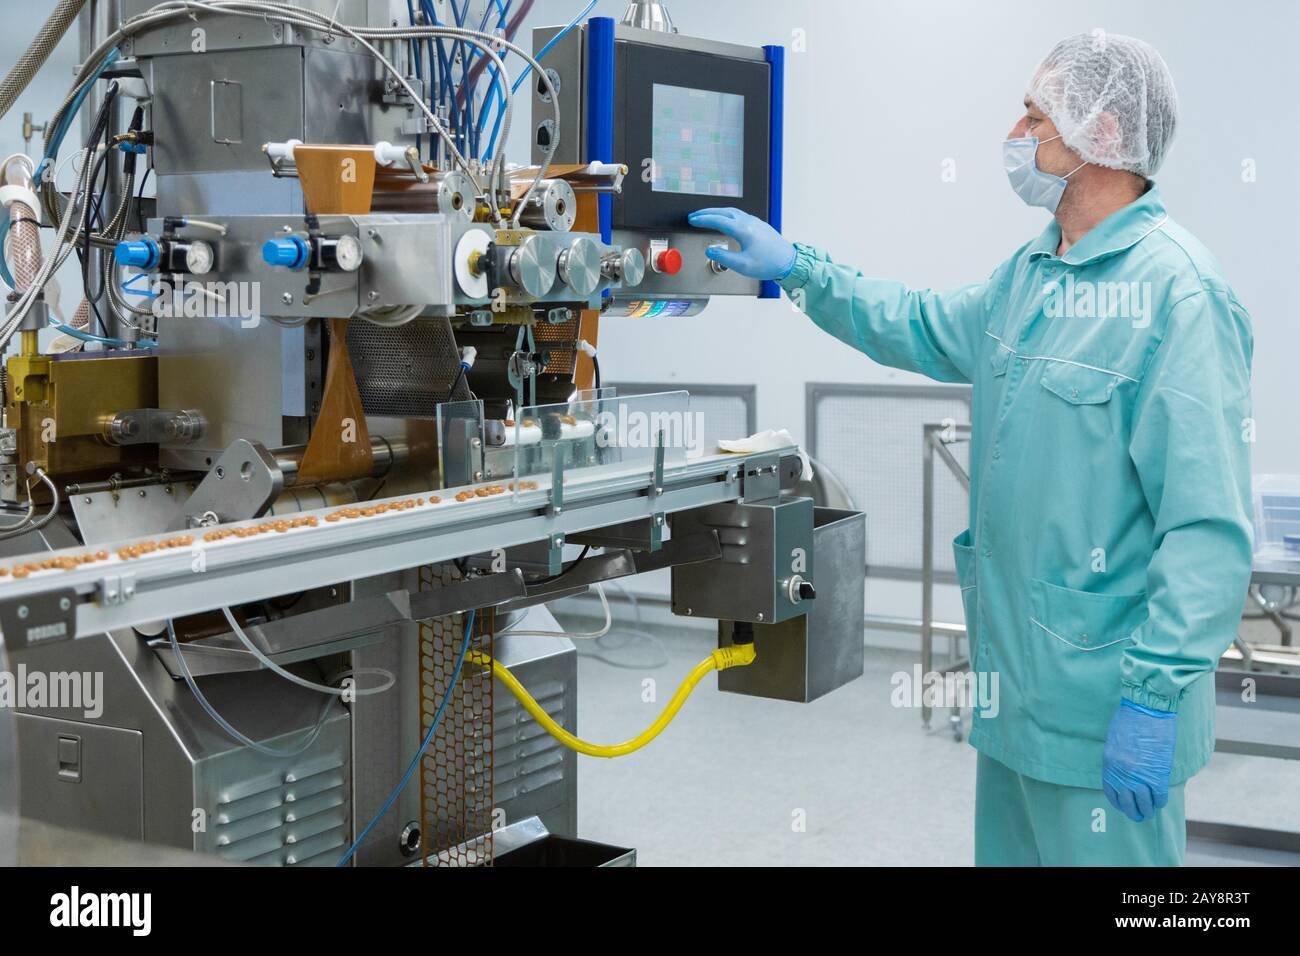 Pharmacy industry factory man worker in protective clothing in sterile working conditions Stock Photo